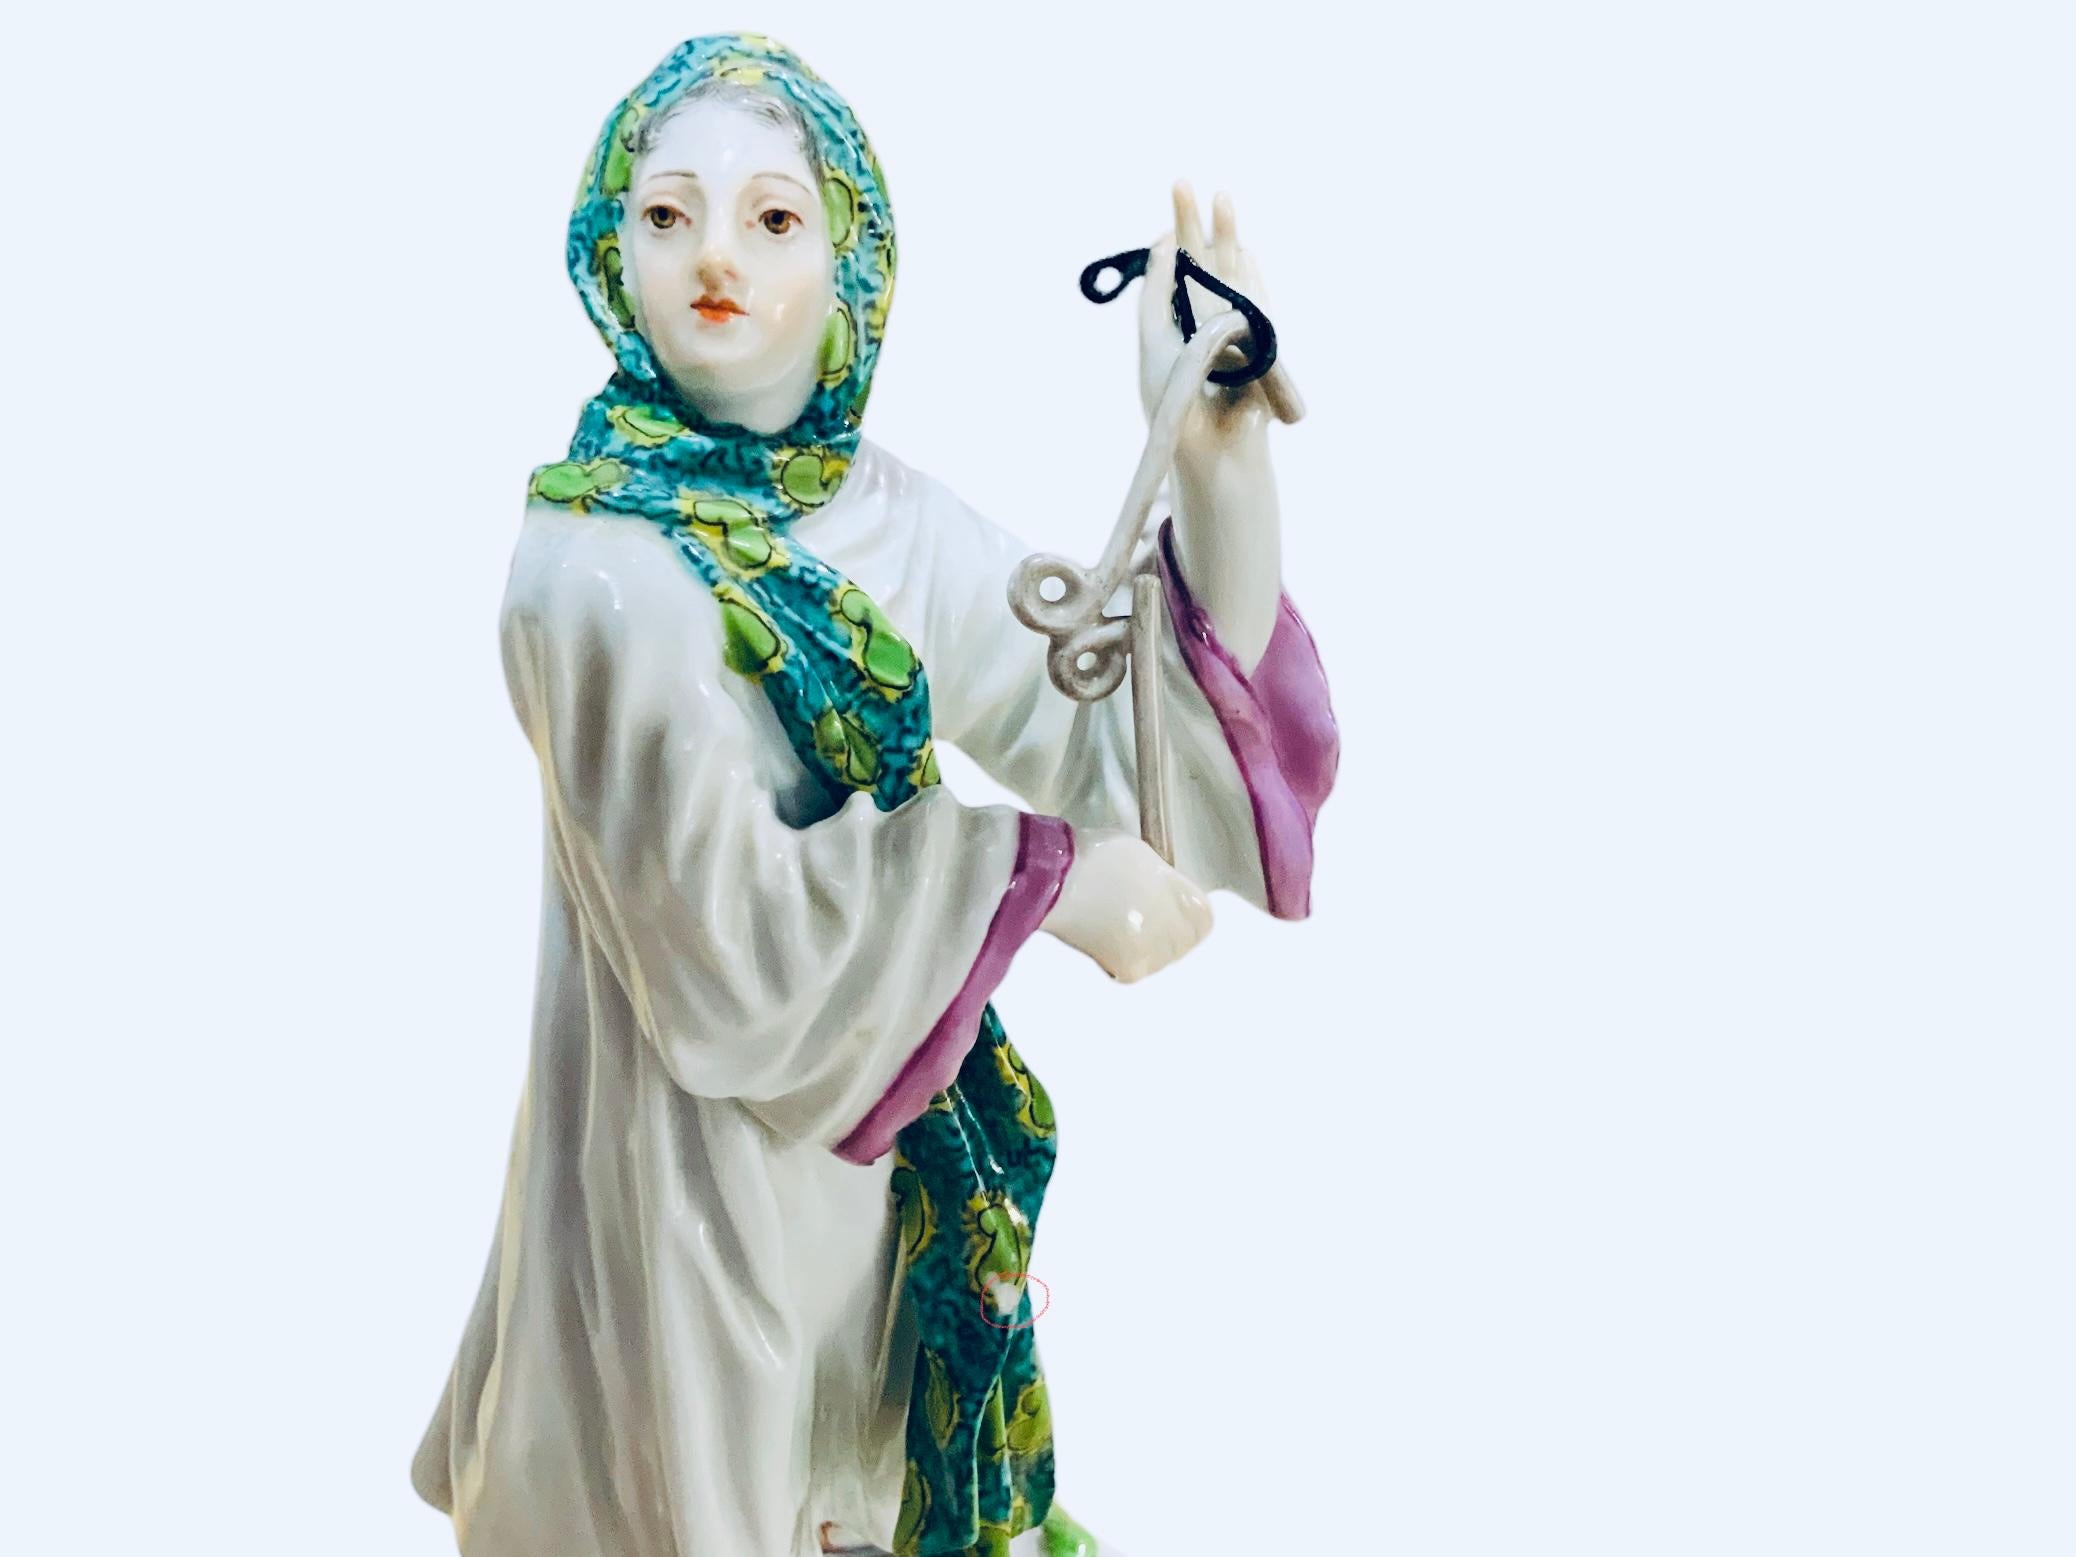 A Meissen Porcelain figurine of a Middle East lady. It depicts a lady dressed with a white and pink robed garb. She is wearing a Middle East headdress painted green and turquoise color. She is standing up over a square porcelain base adorned with